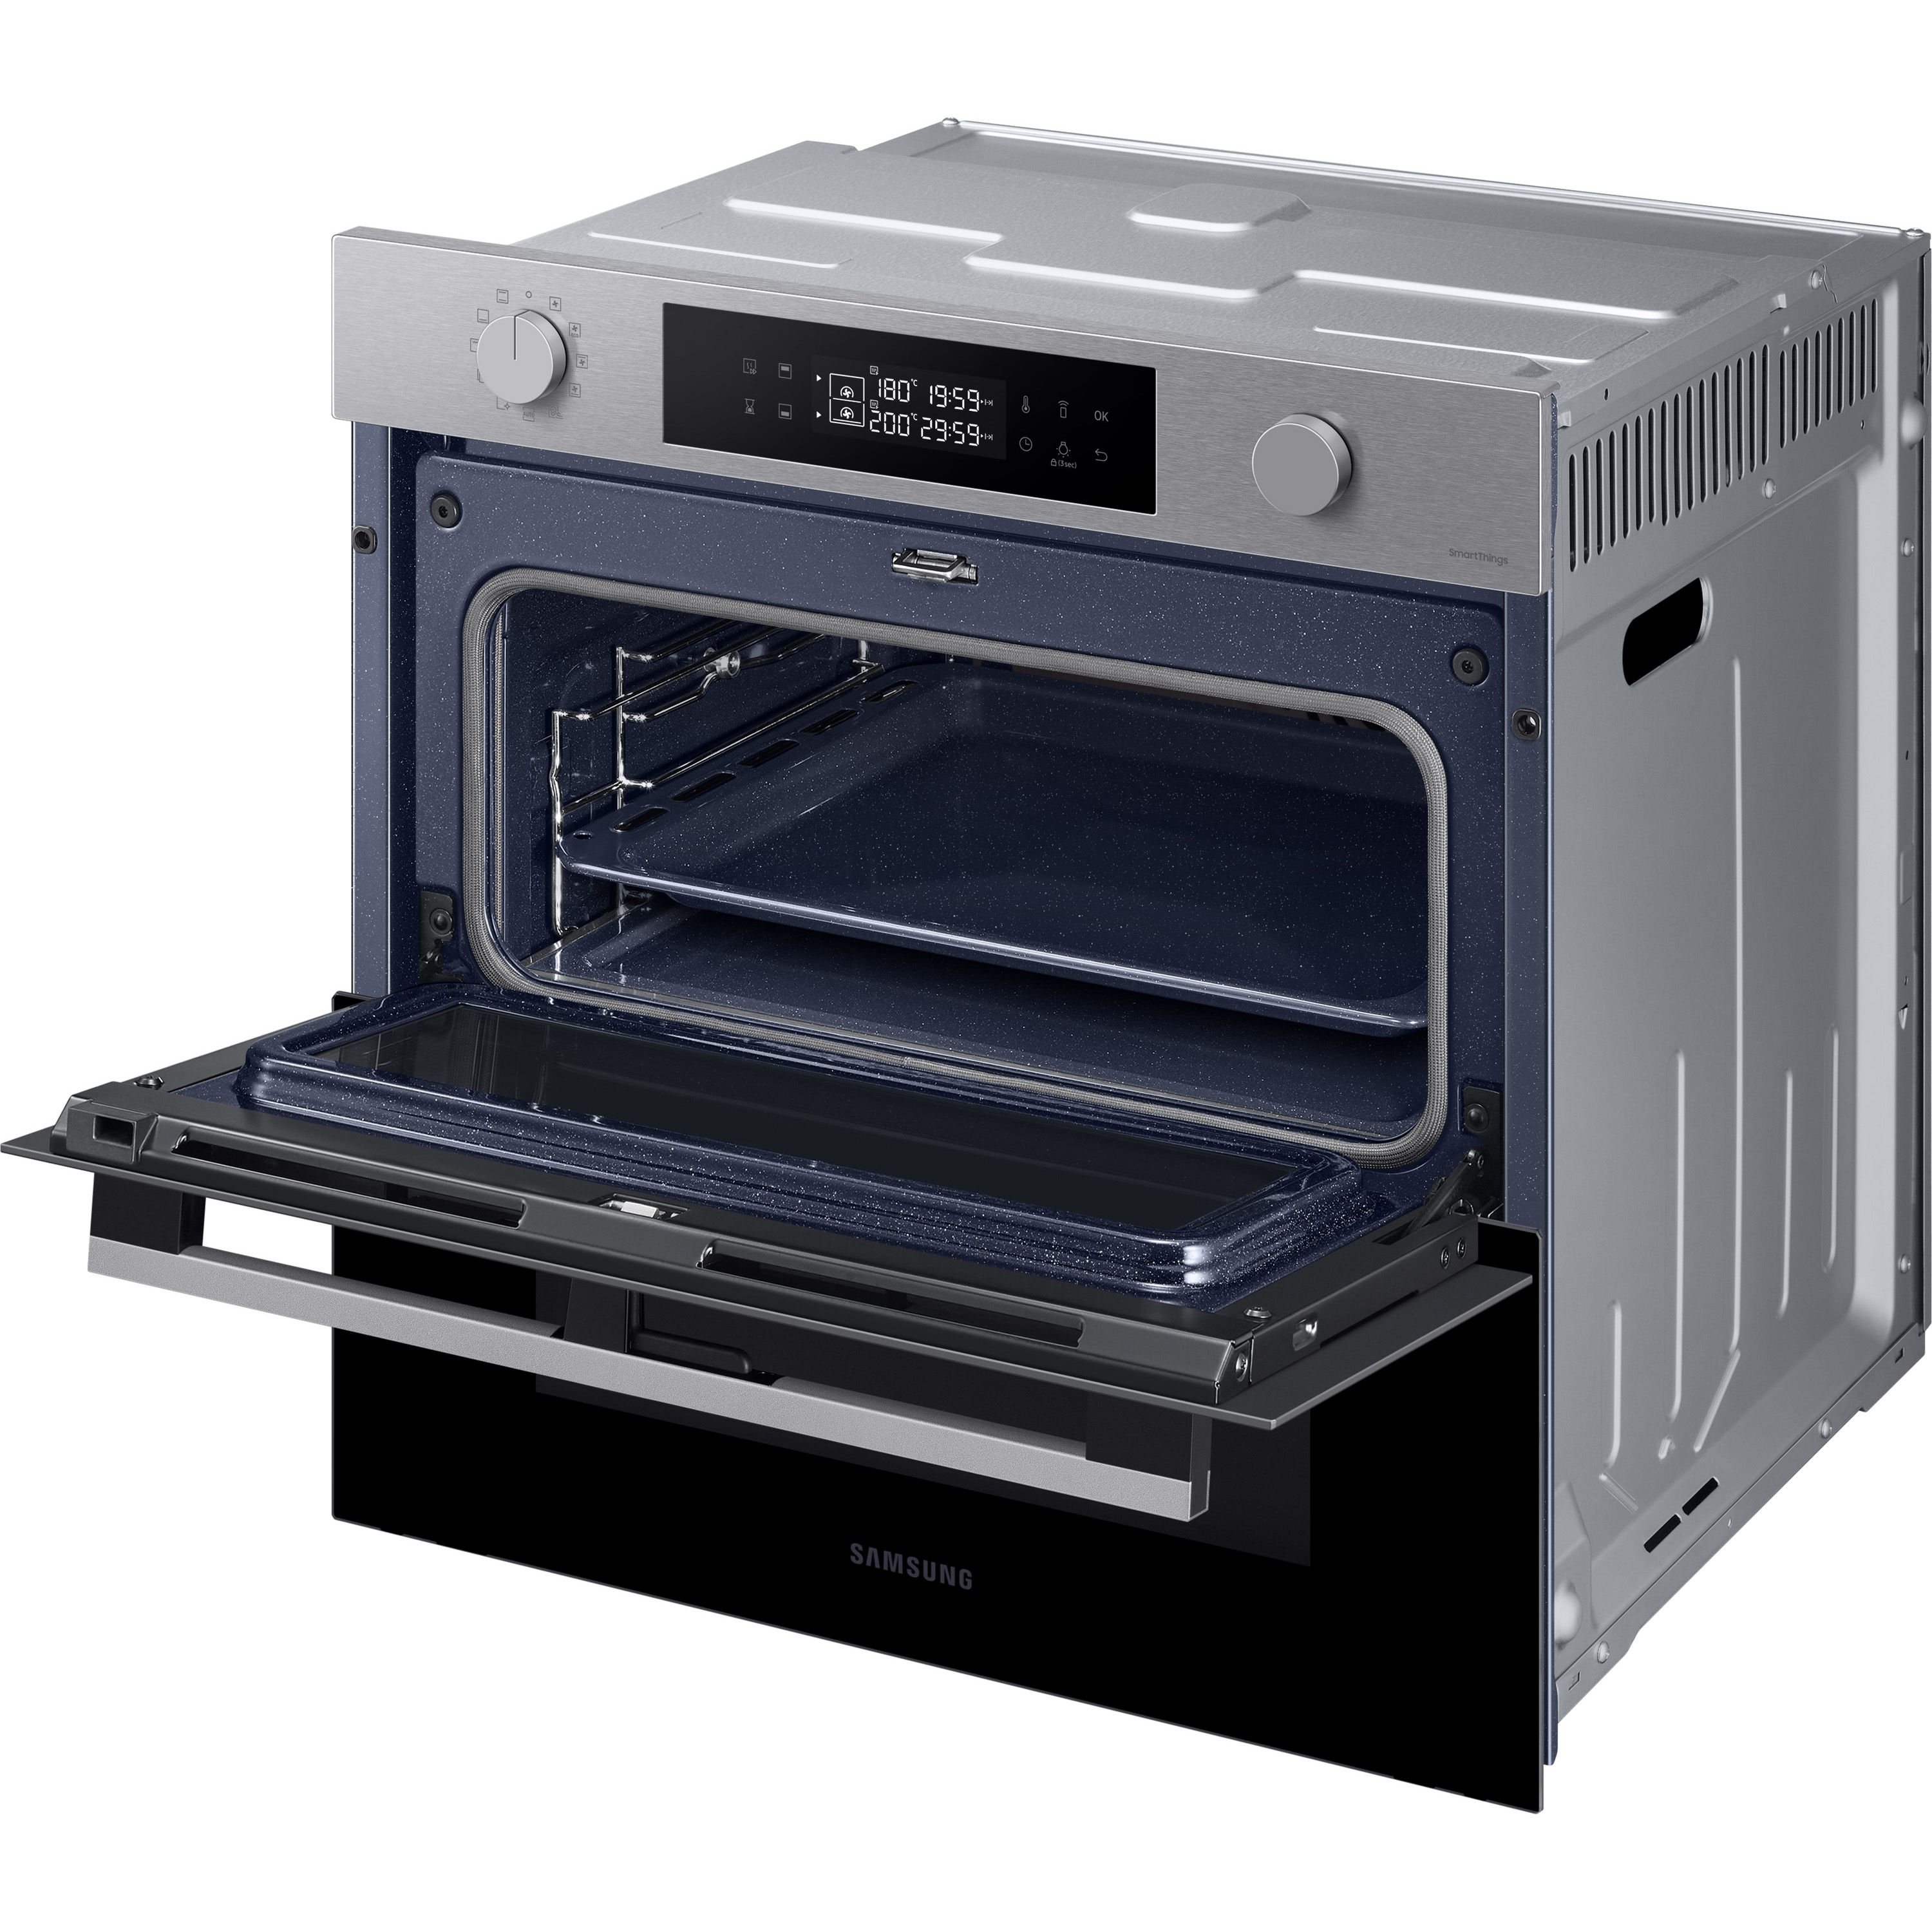 Samsung Series 4 Dual Cook Flex™ NV7B45205AS_SS Built-in Single Multifunction Oven - Stainless steel effect